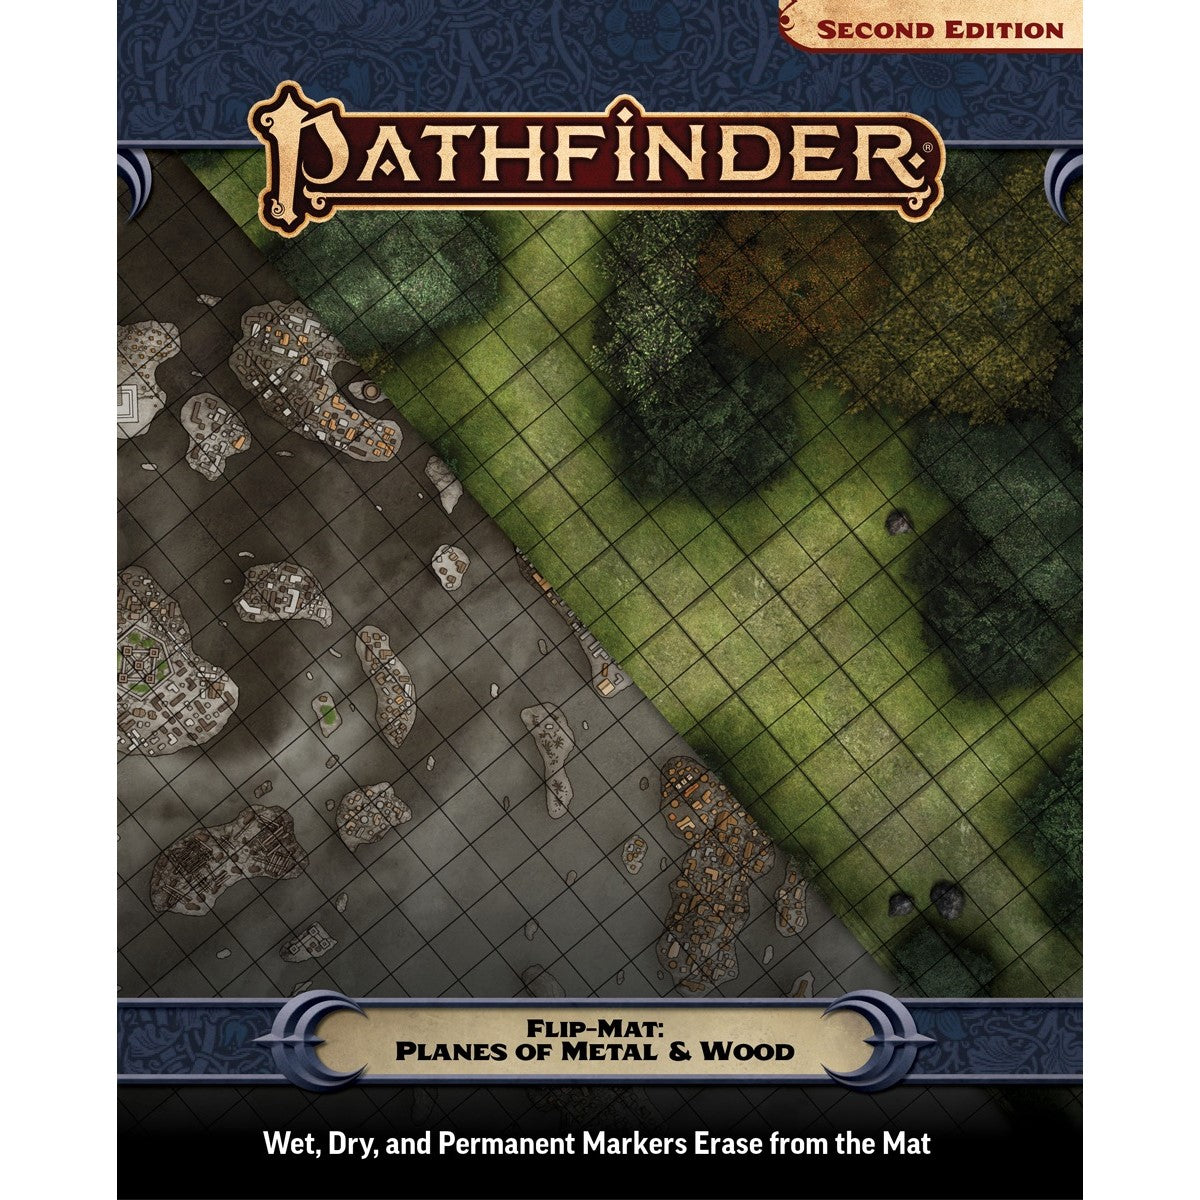 Pathfinder Second Edition - Flip-Mat - Planes of Metal and Wood